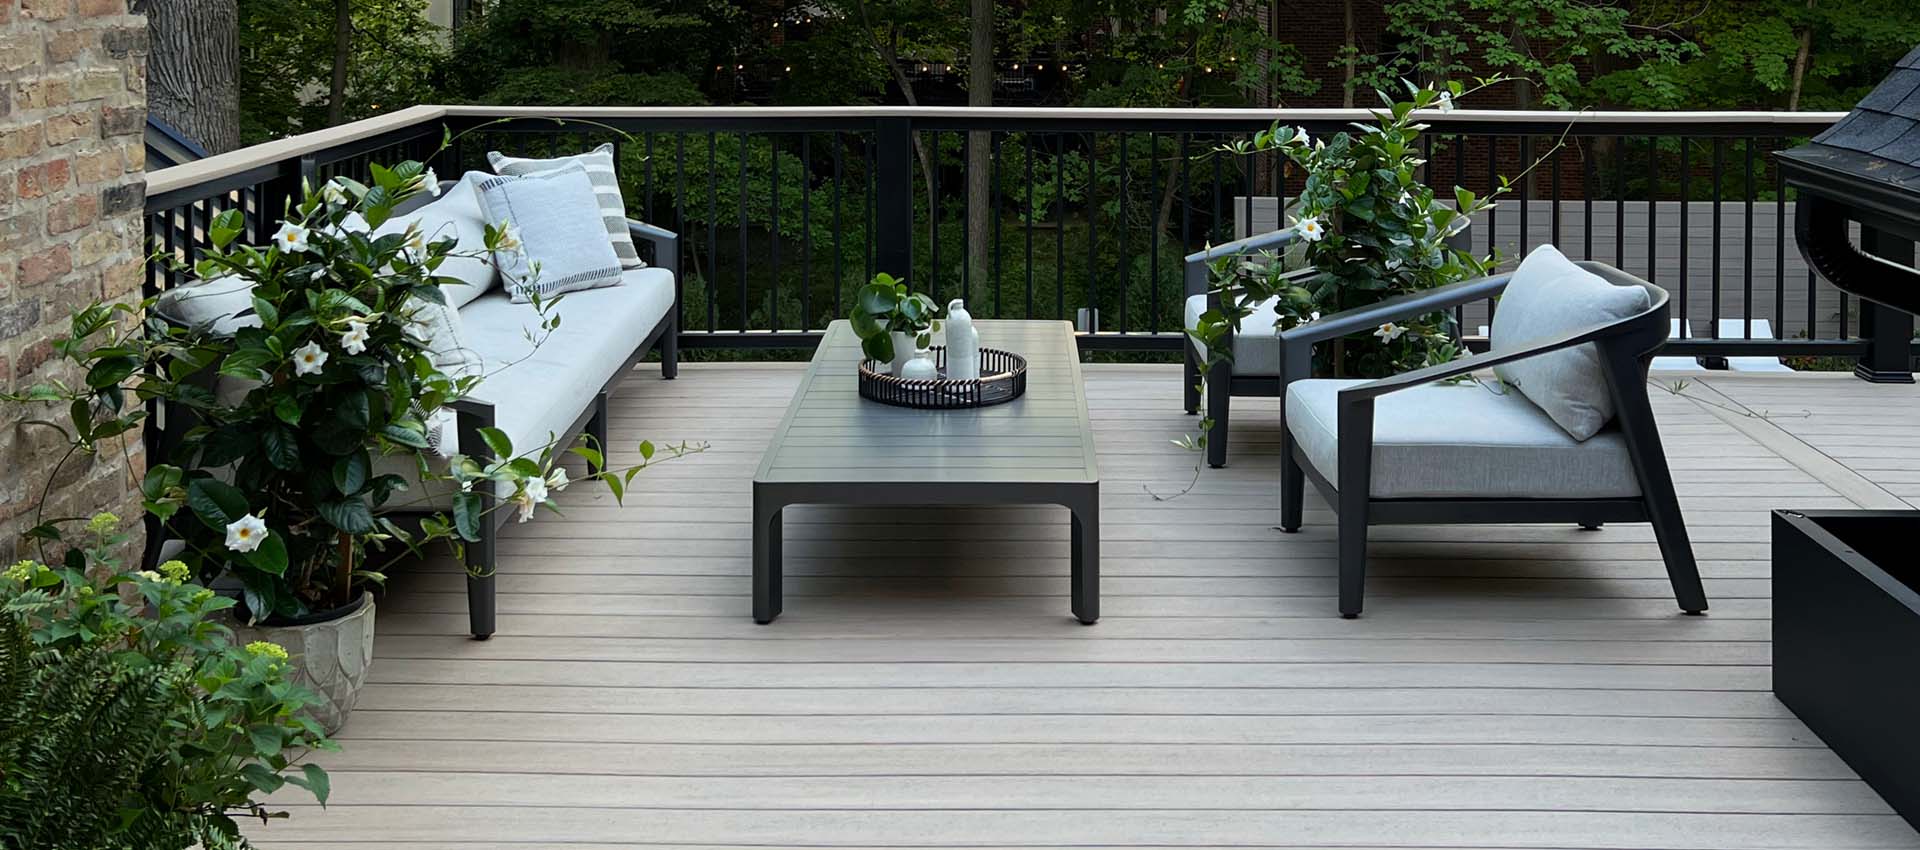 Light tan deck boards with mid century modern furniture and beautiful flowering plants with vines